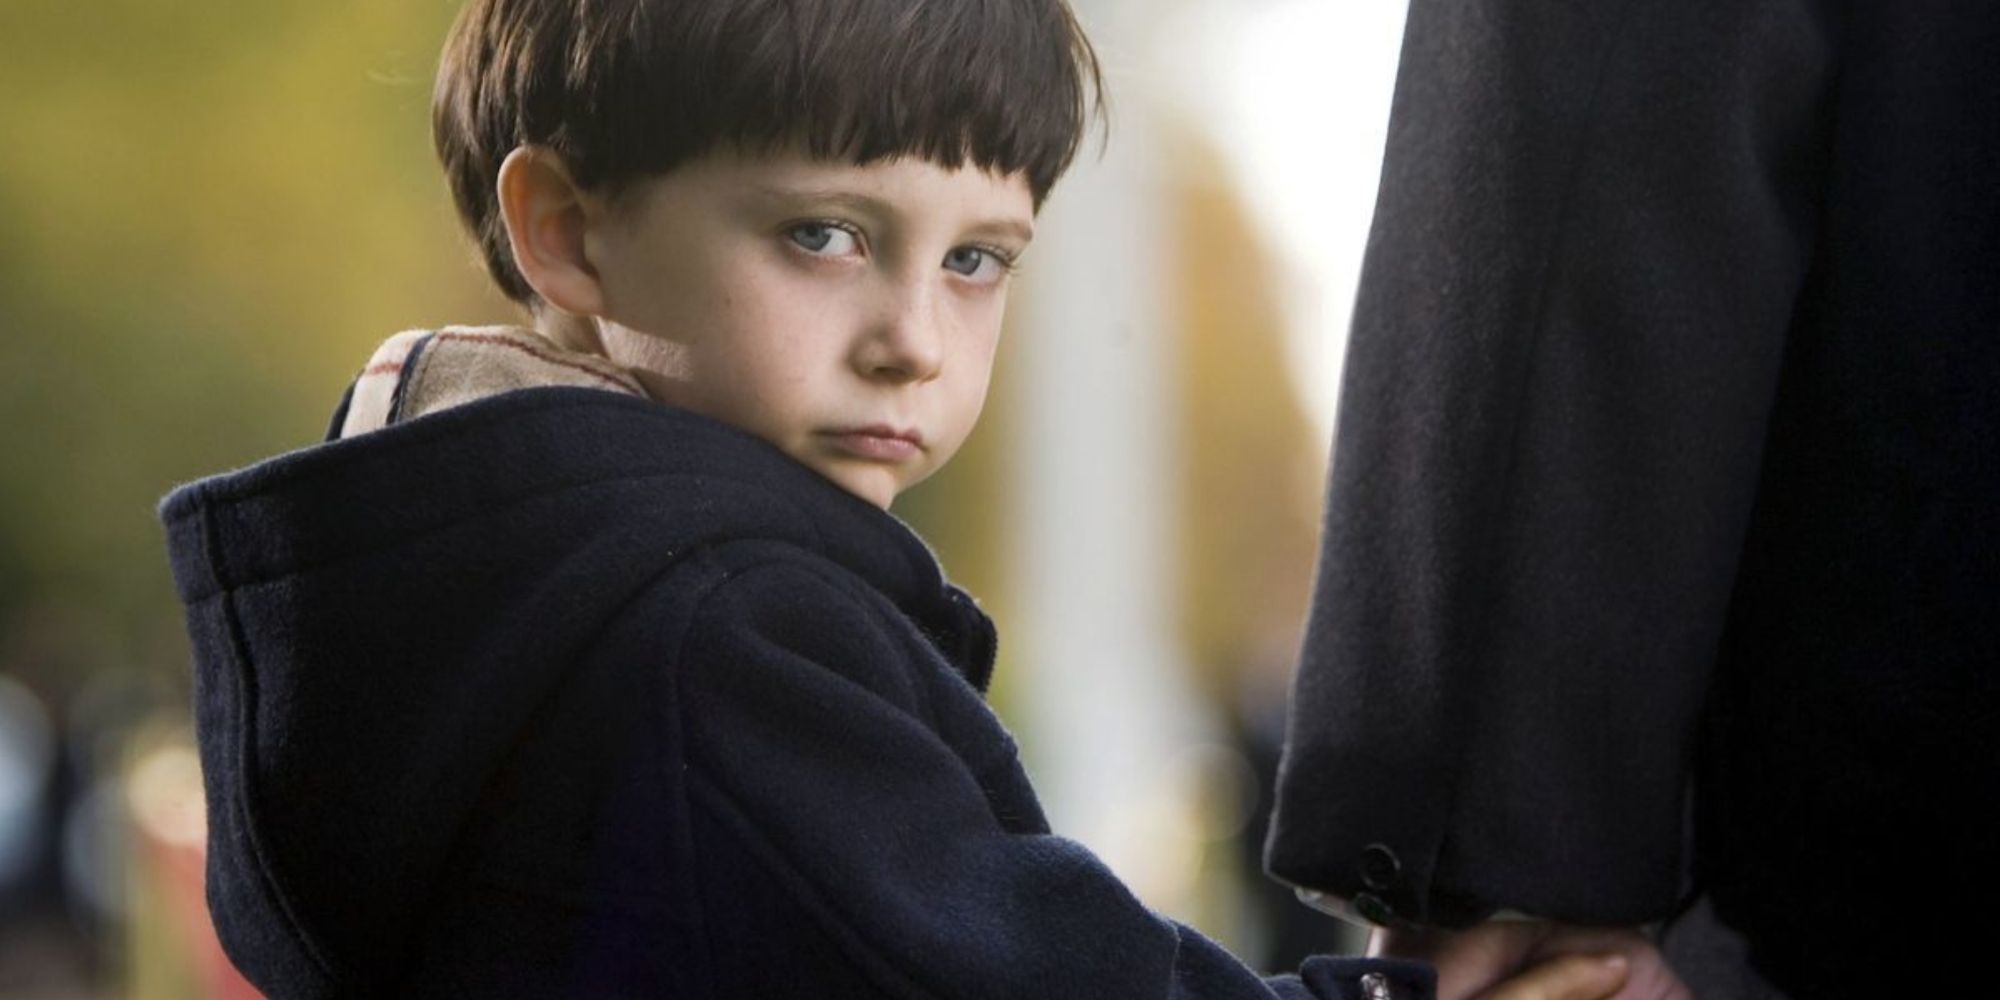 Damien (Seamus Davey-Fitzpatrick) staring directly into the camera in 'The Omen' (2006)